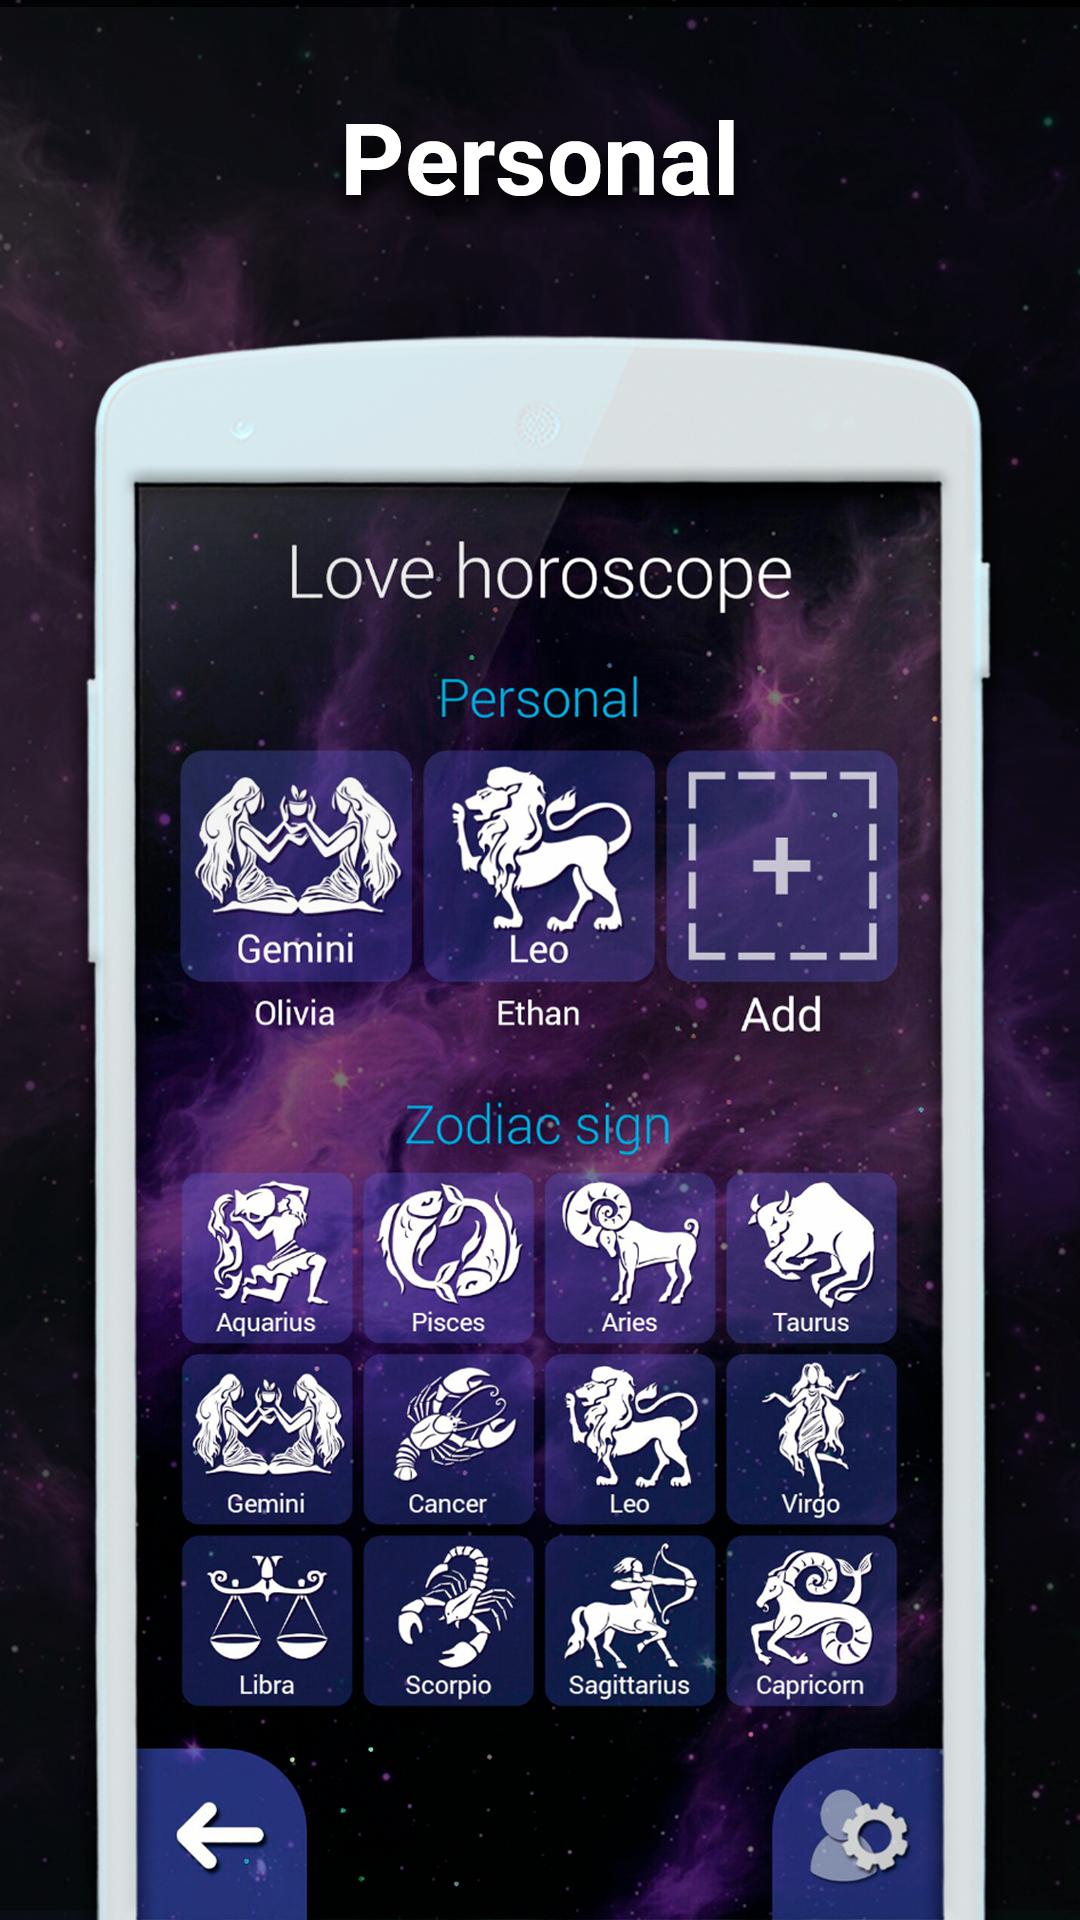 2020 yearly horoscope by date of birth